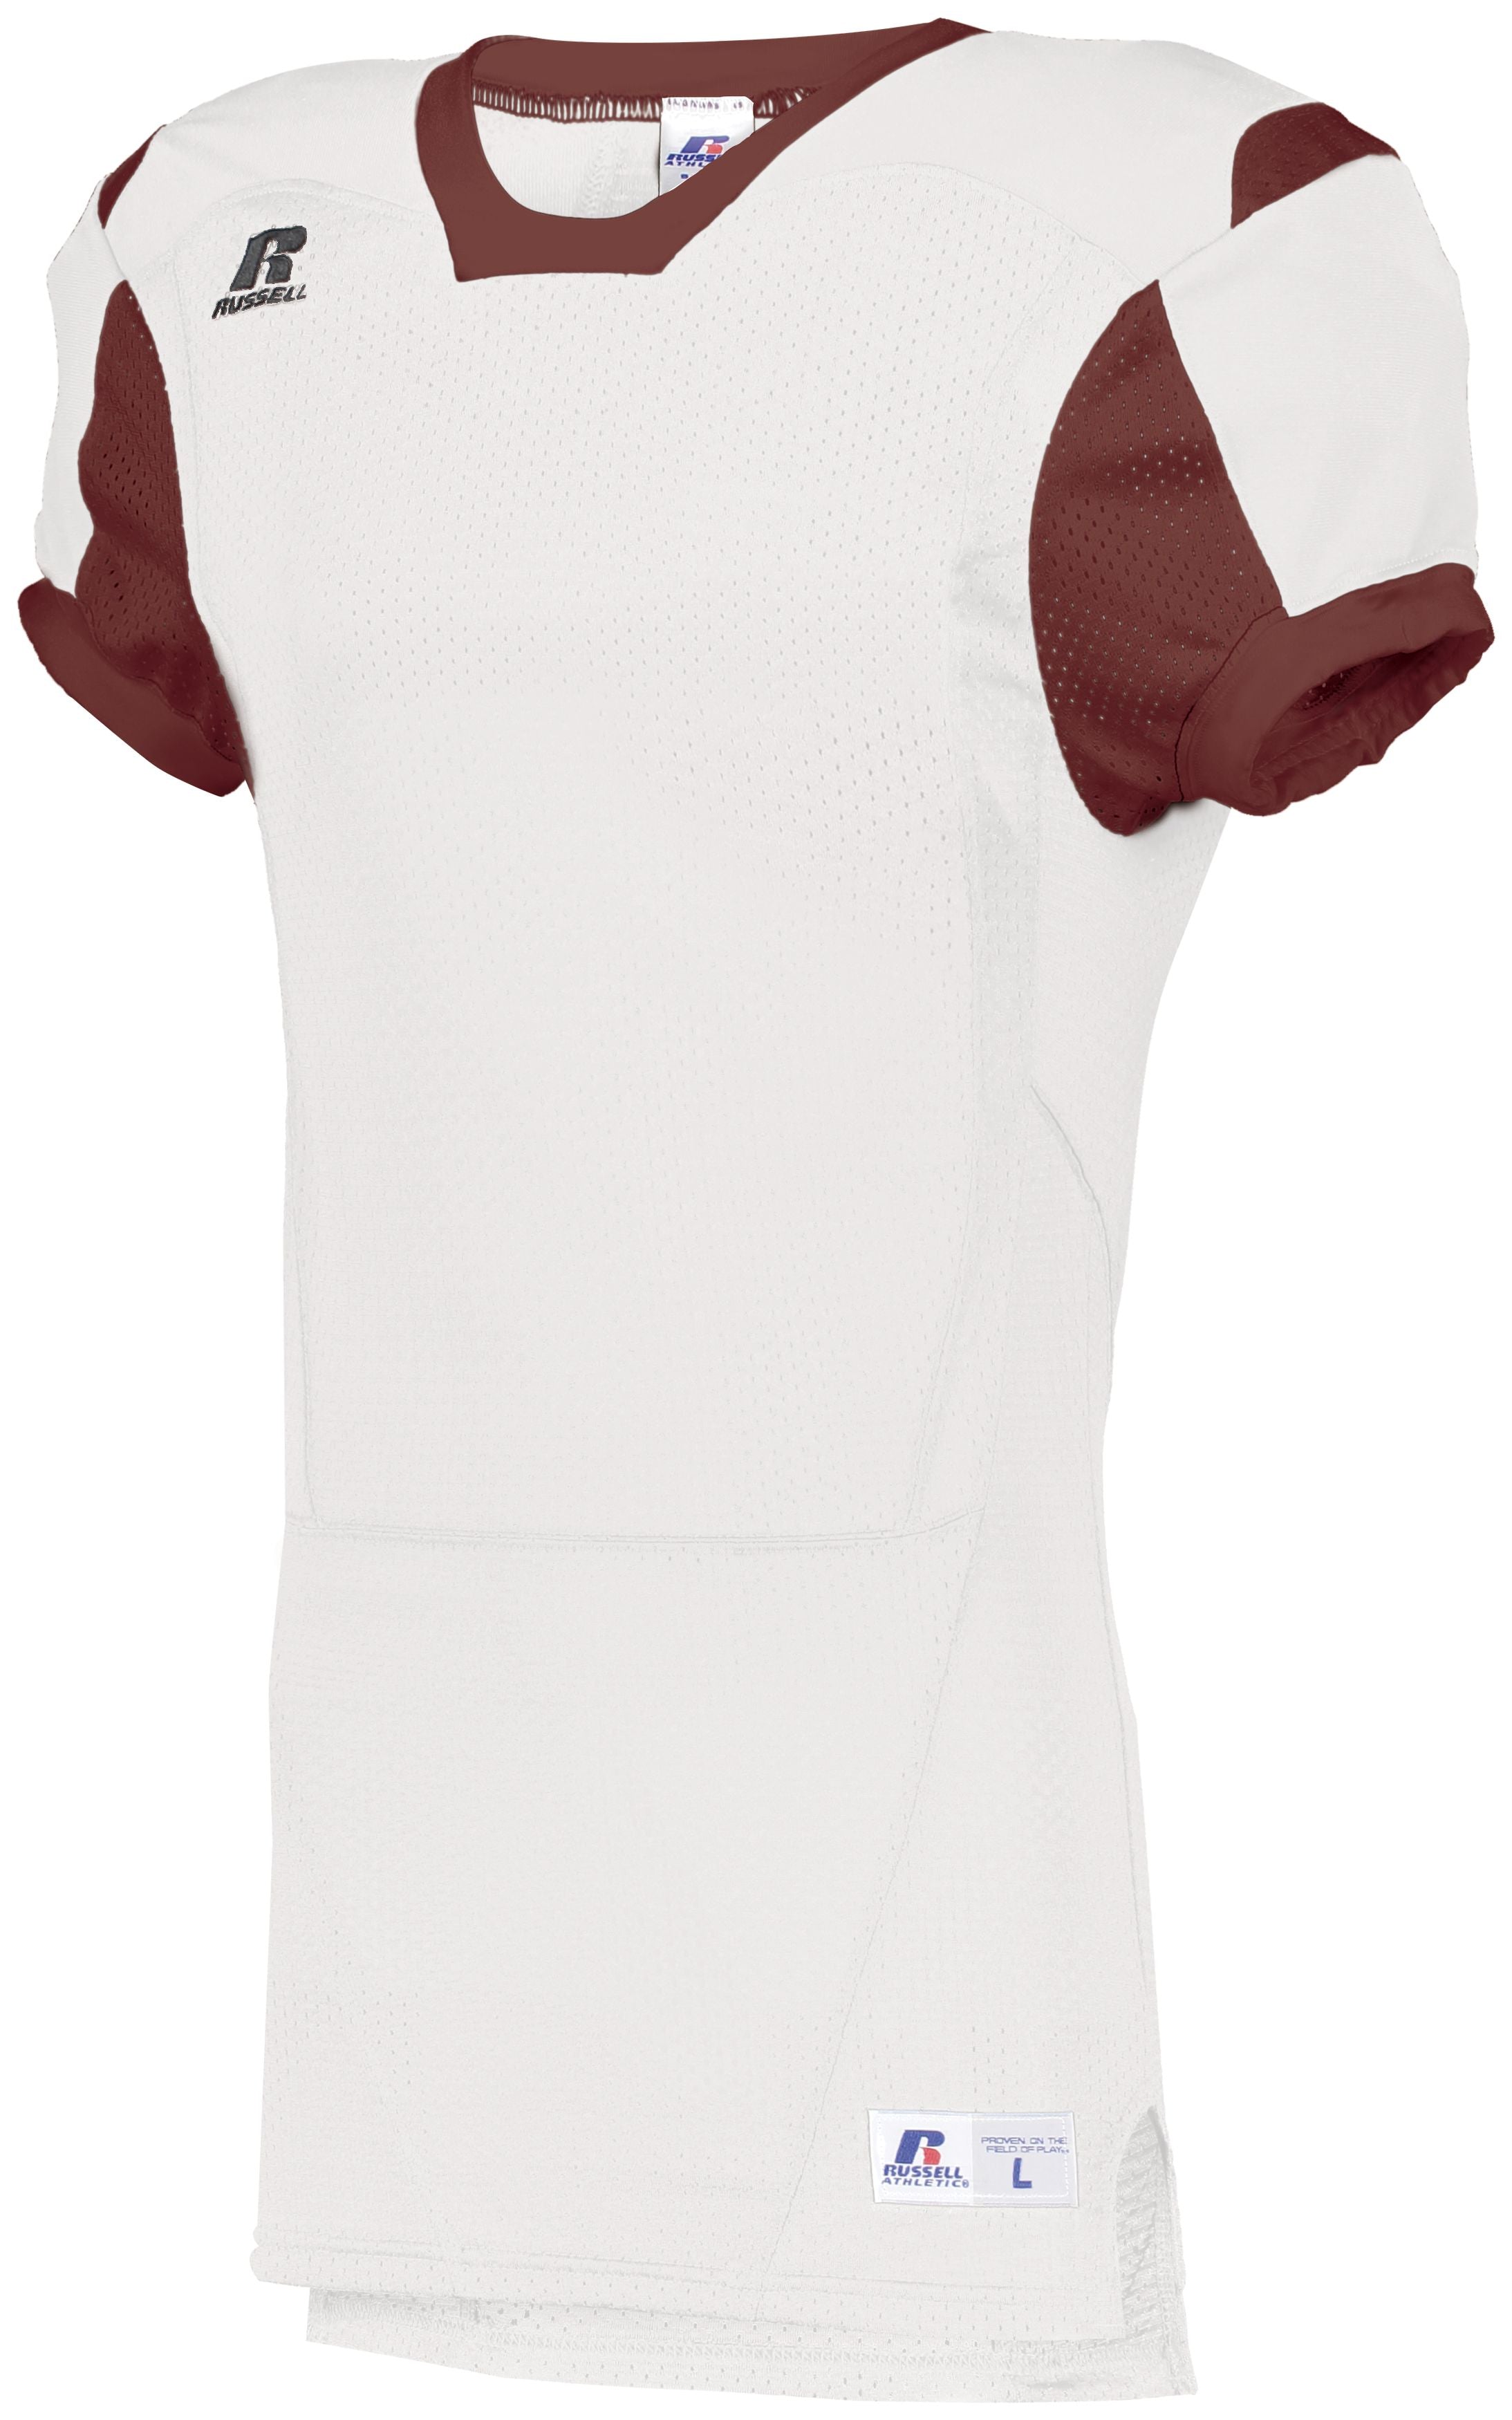 Russell Athletic Color Block Game Jersey in White/Cardinal  -Part of the Adult, Adult-Jersey, Football, Russell-Athletic-Products, Shirts, All-Sports, All-Sports-1 product lines at KanaleyCreations.com